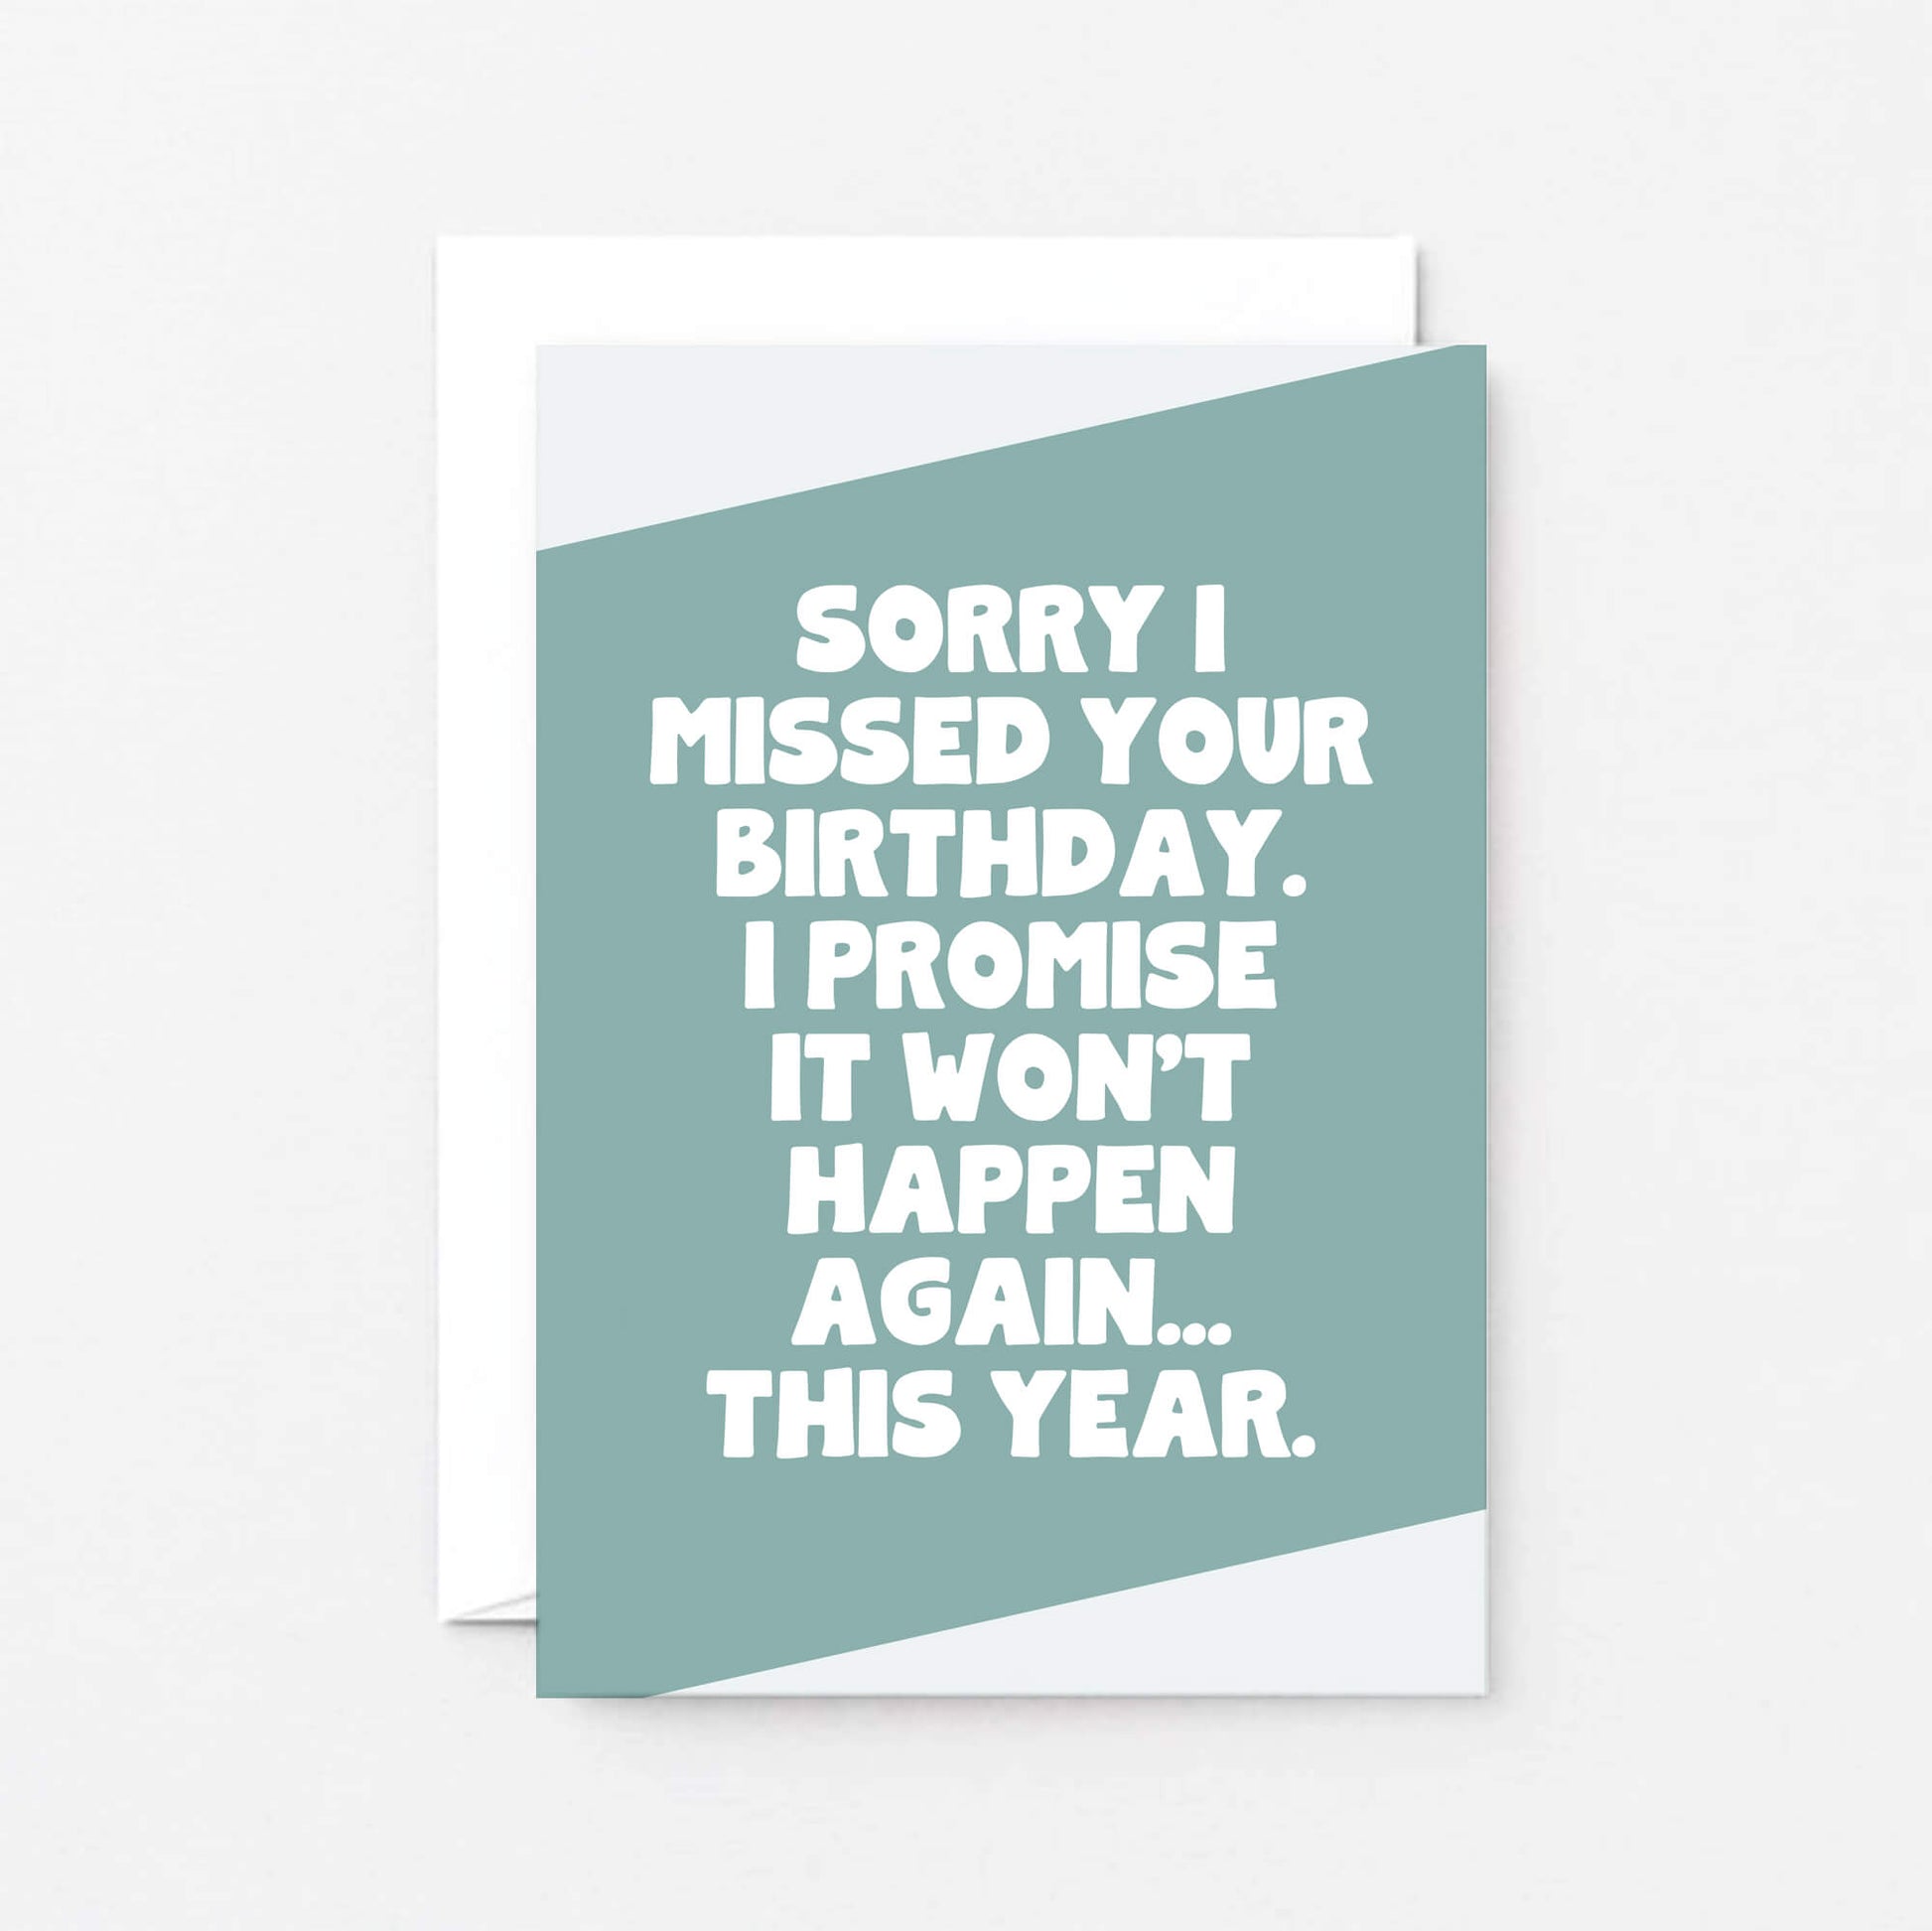 Belated Birthday Card by SixElevenCreations. Reads Sorry I missed your birthday. I promise it won't happen again... this year. Product Code SE3075A6